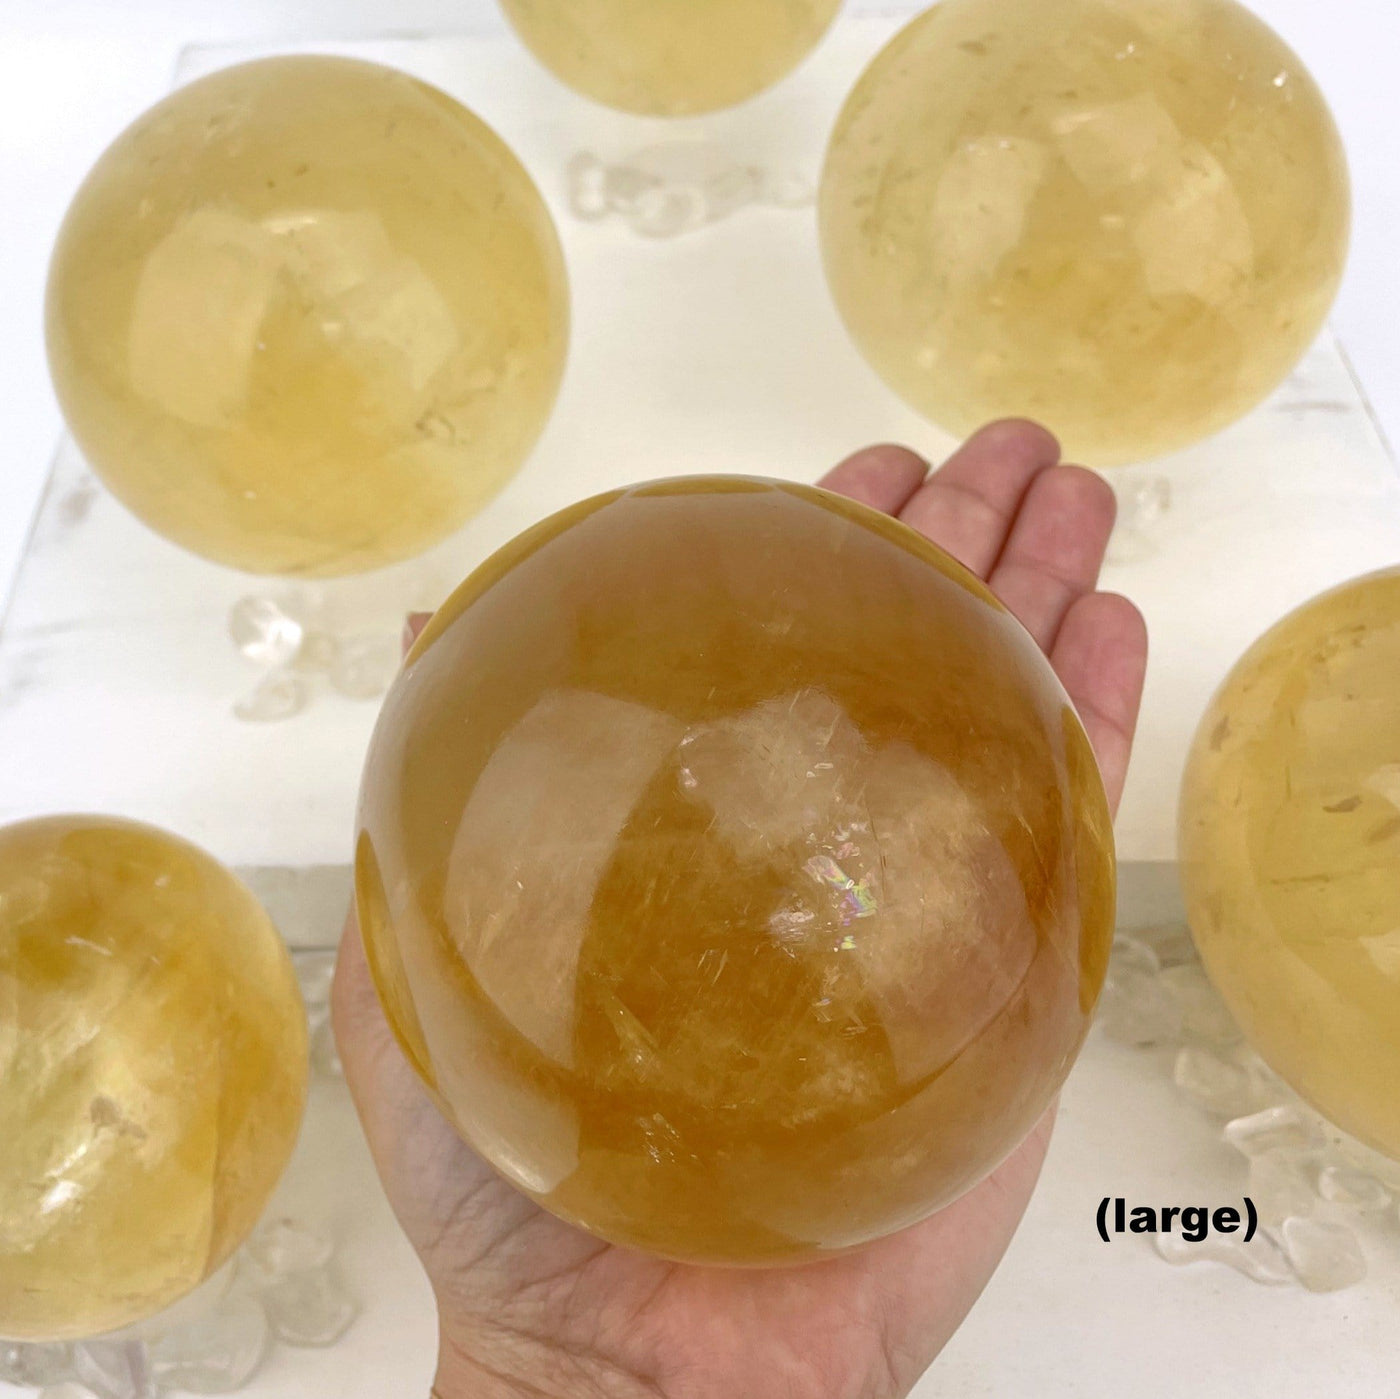 hand holding up large Honey Calcite Polished Spheres with others in the background